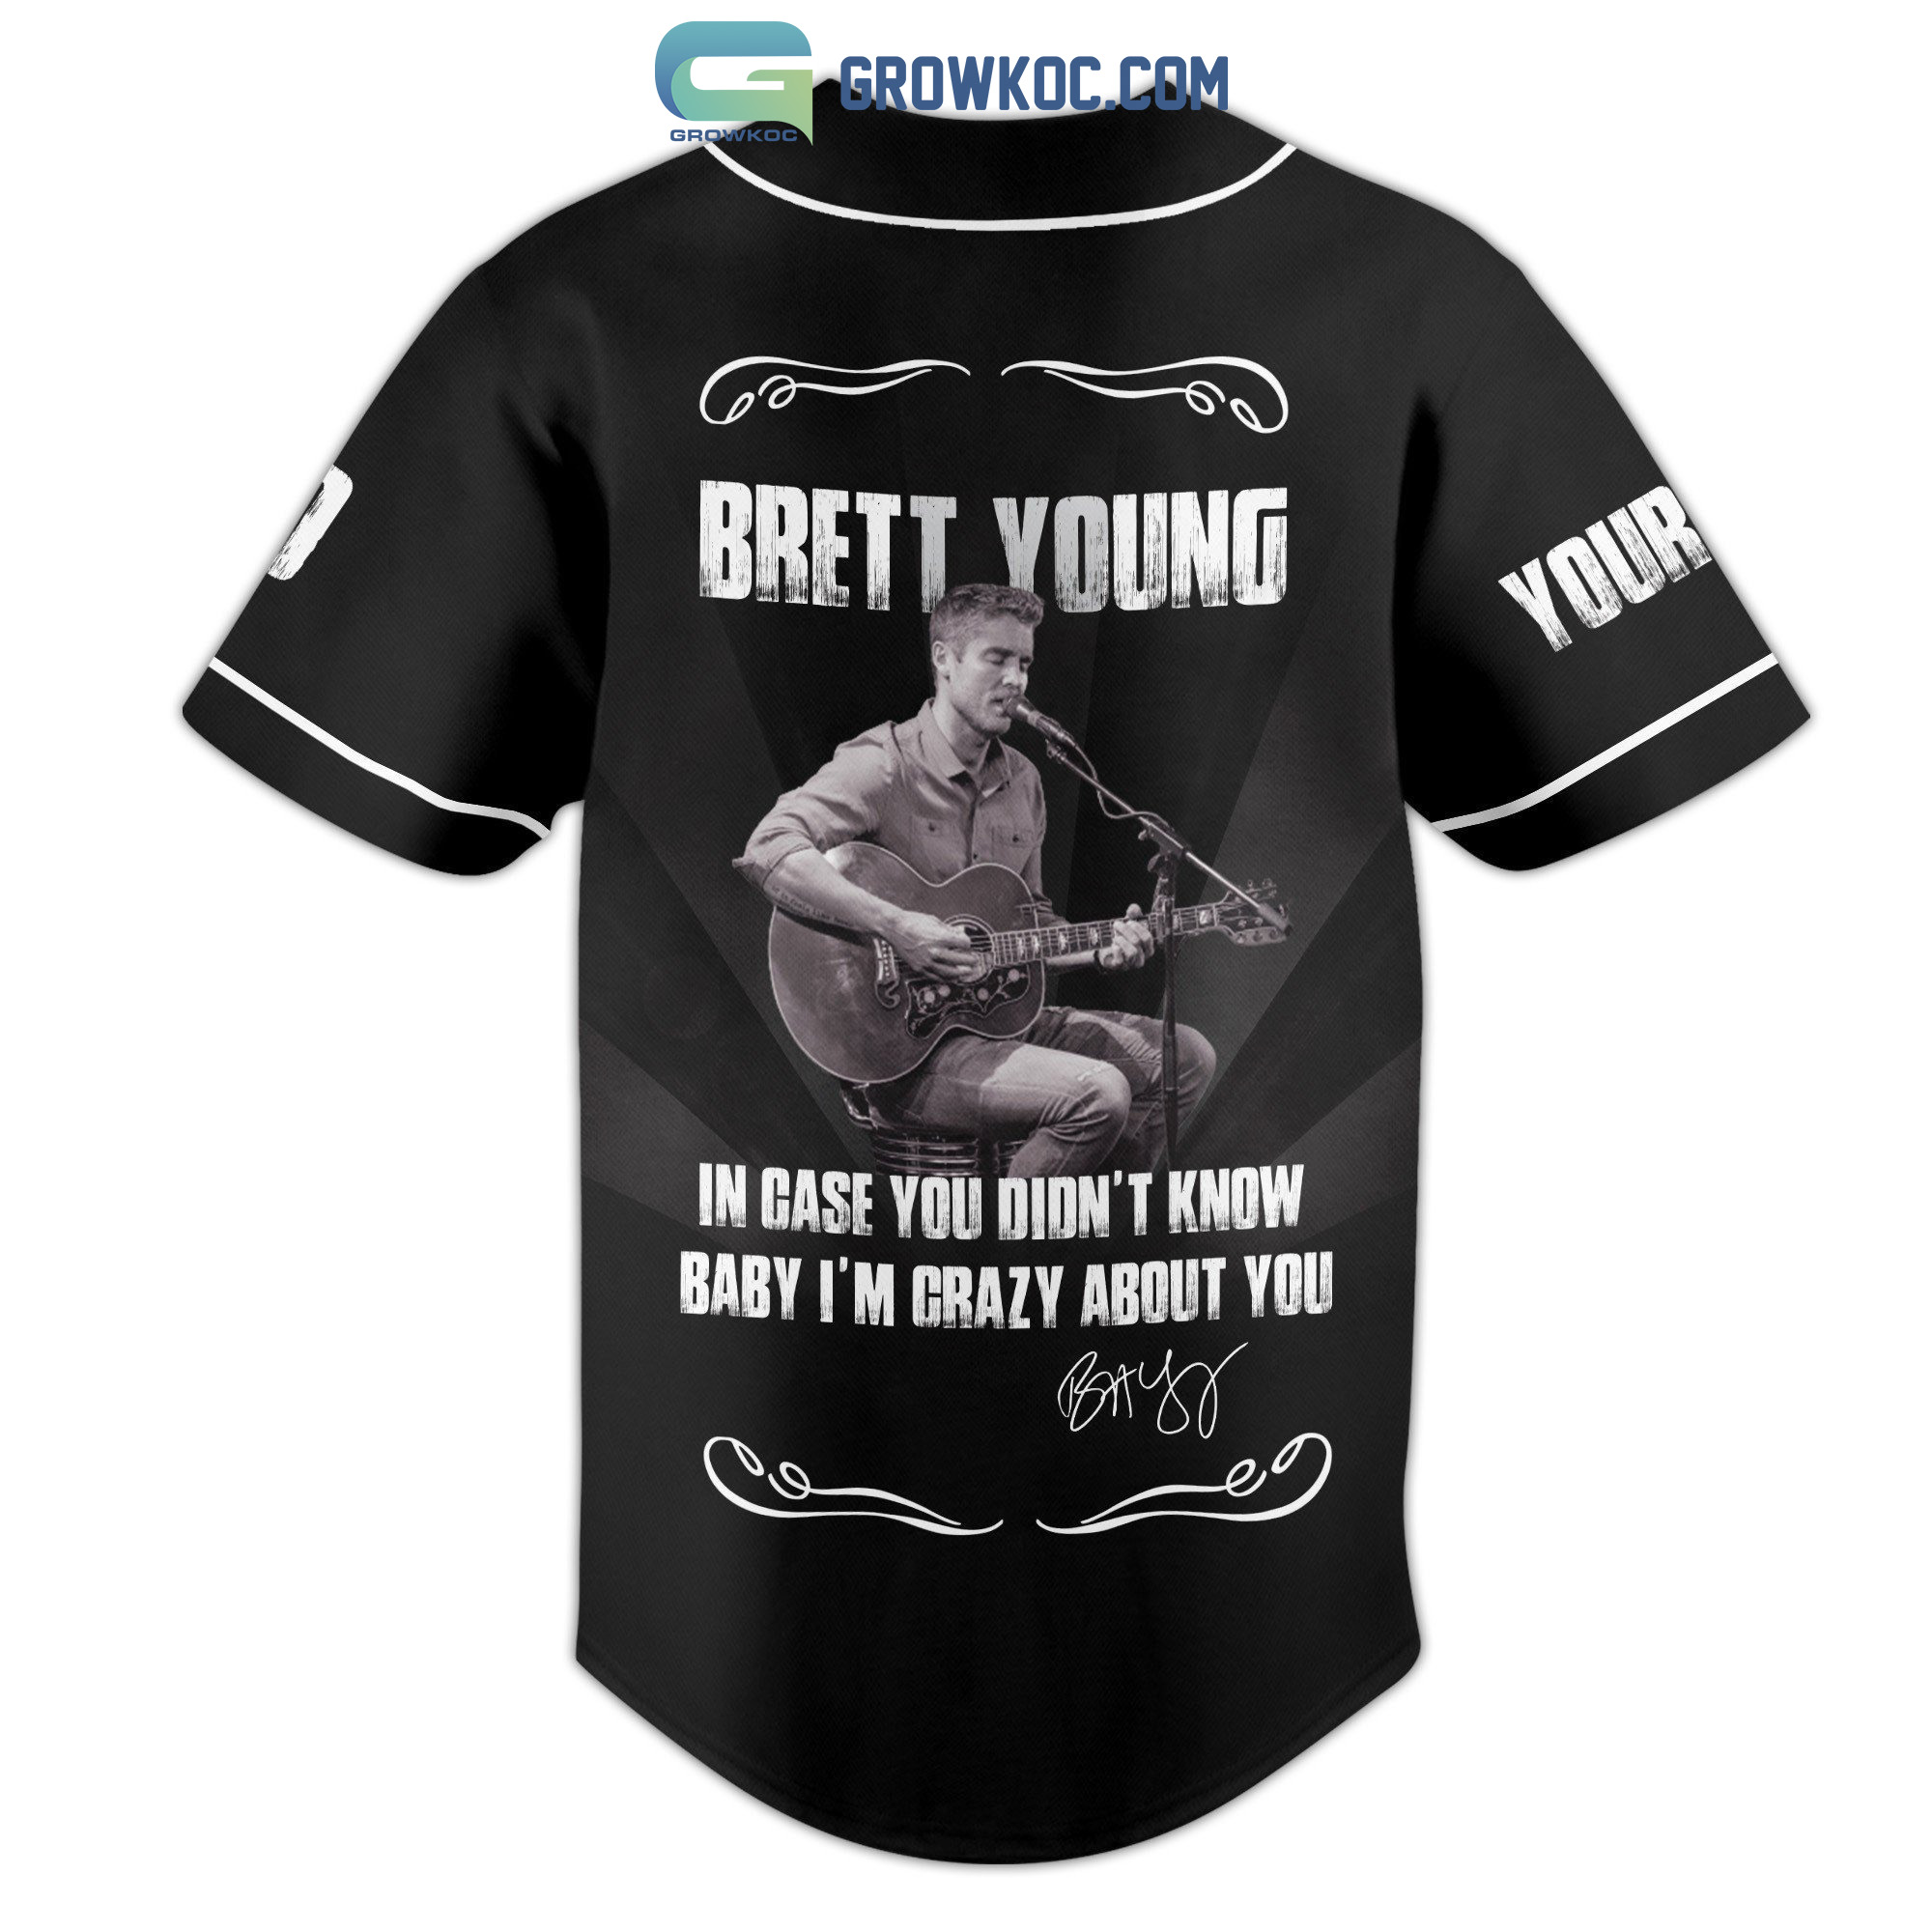 Brett Young In Case You Didn't Know Baby I'm Crazy About You Black Design Personalized Baseball Jersey